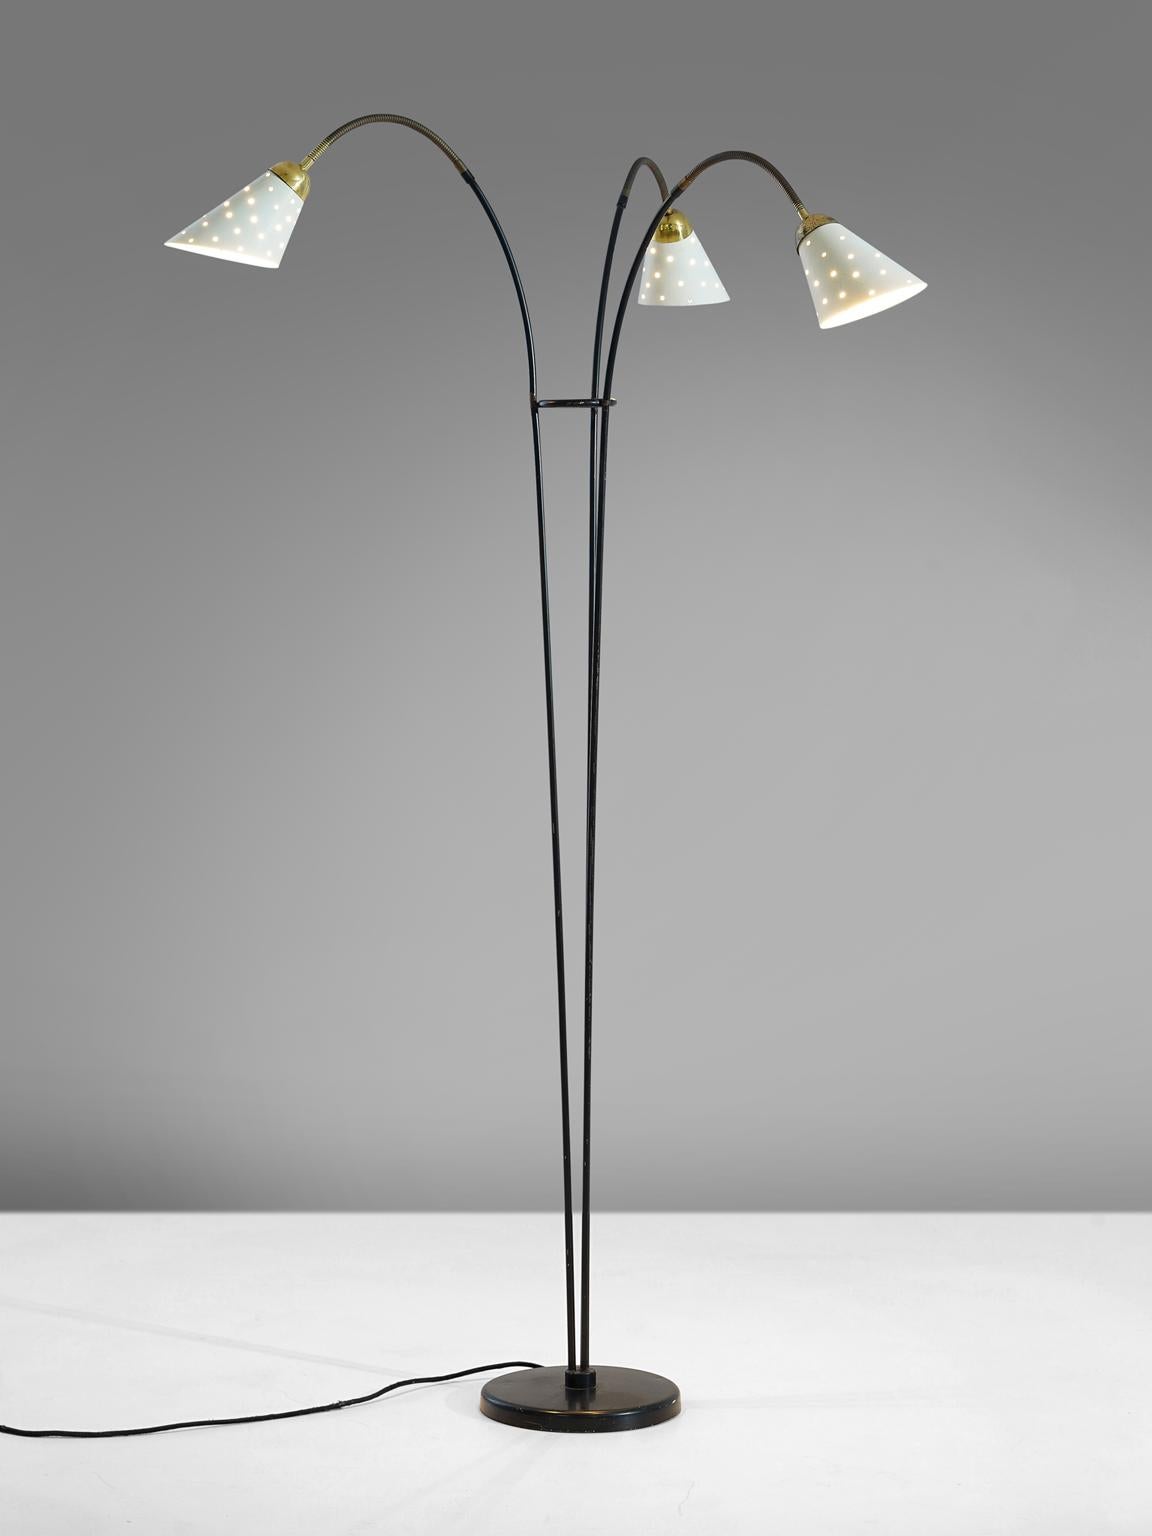 Floor lamp with colored shades in white metal and brass, Italy, 1950s.

This floor lamp is built up of one deep black foot from which one brass stem arises that sprout into three arms. The arms each end in a metal shade, all featuring an off-white